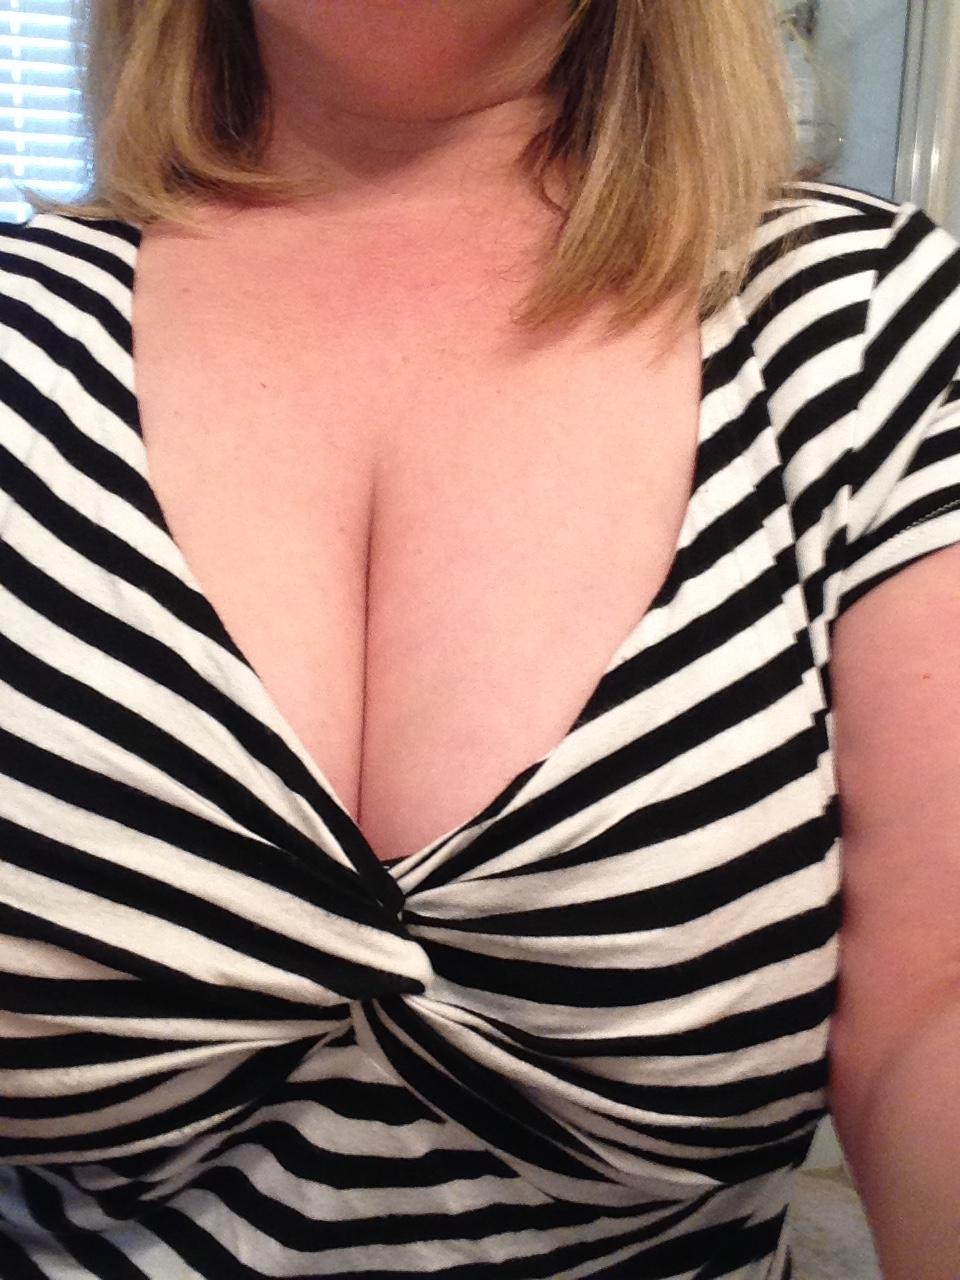 What is black and white and striped all over?